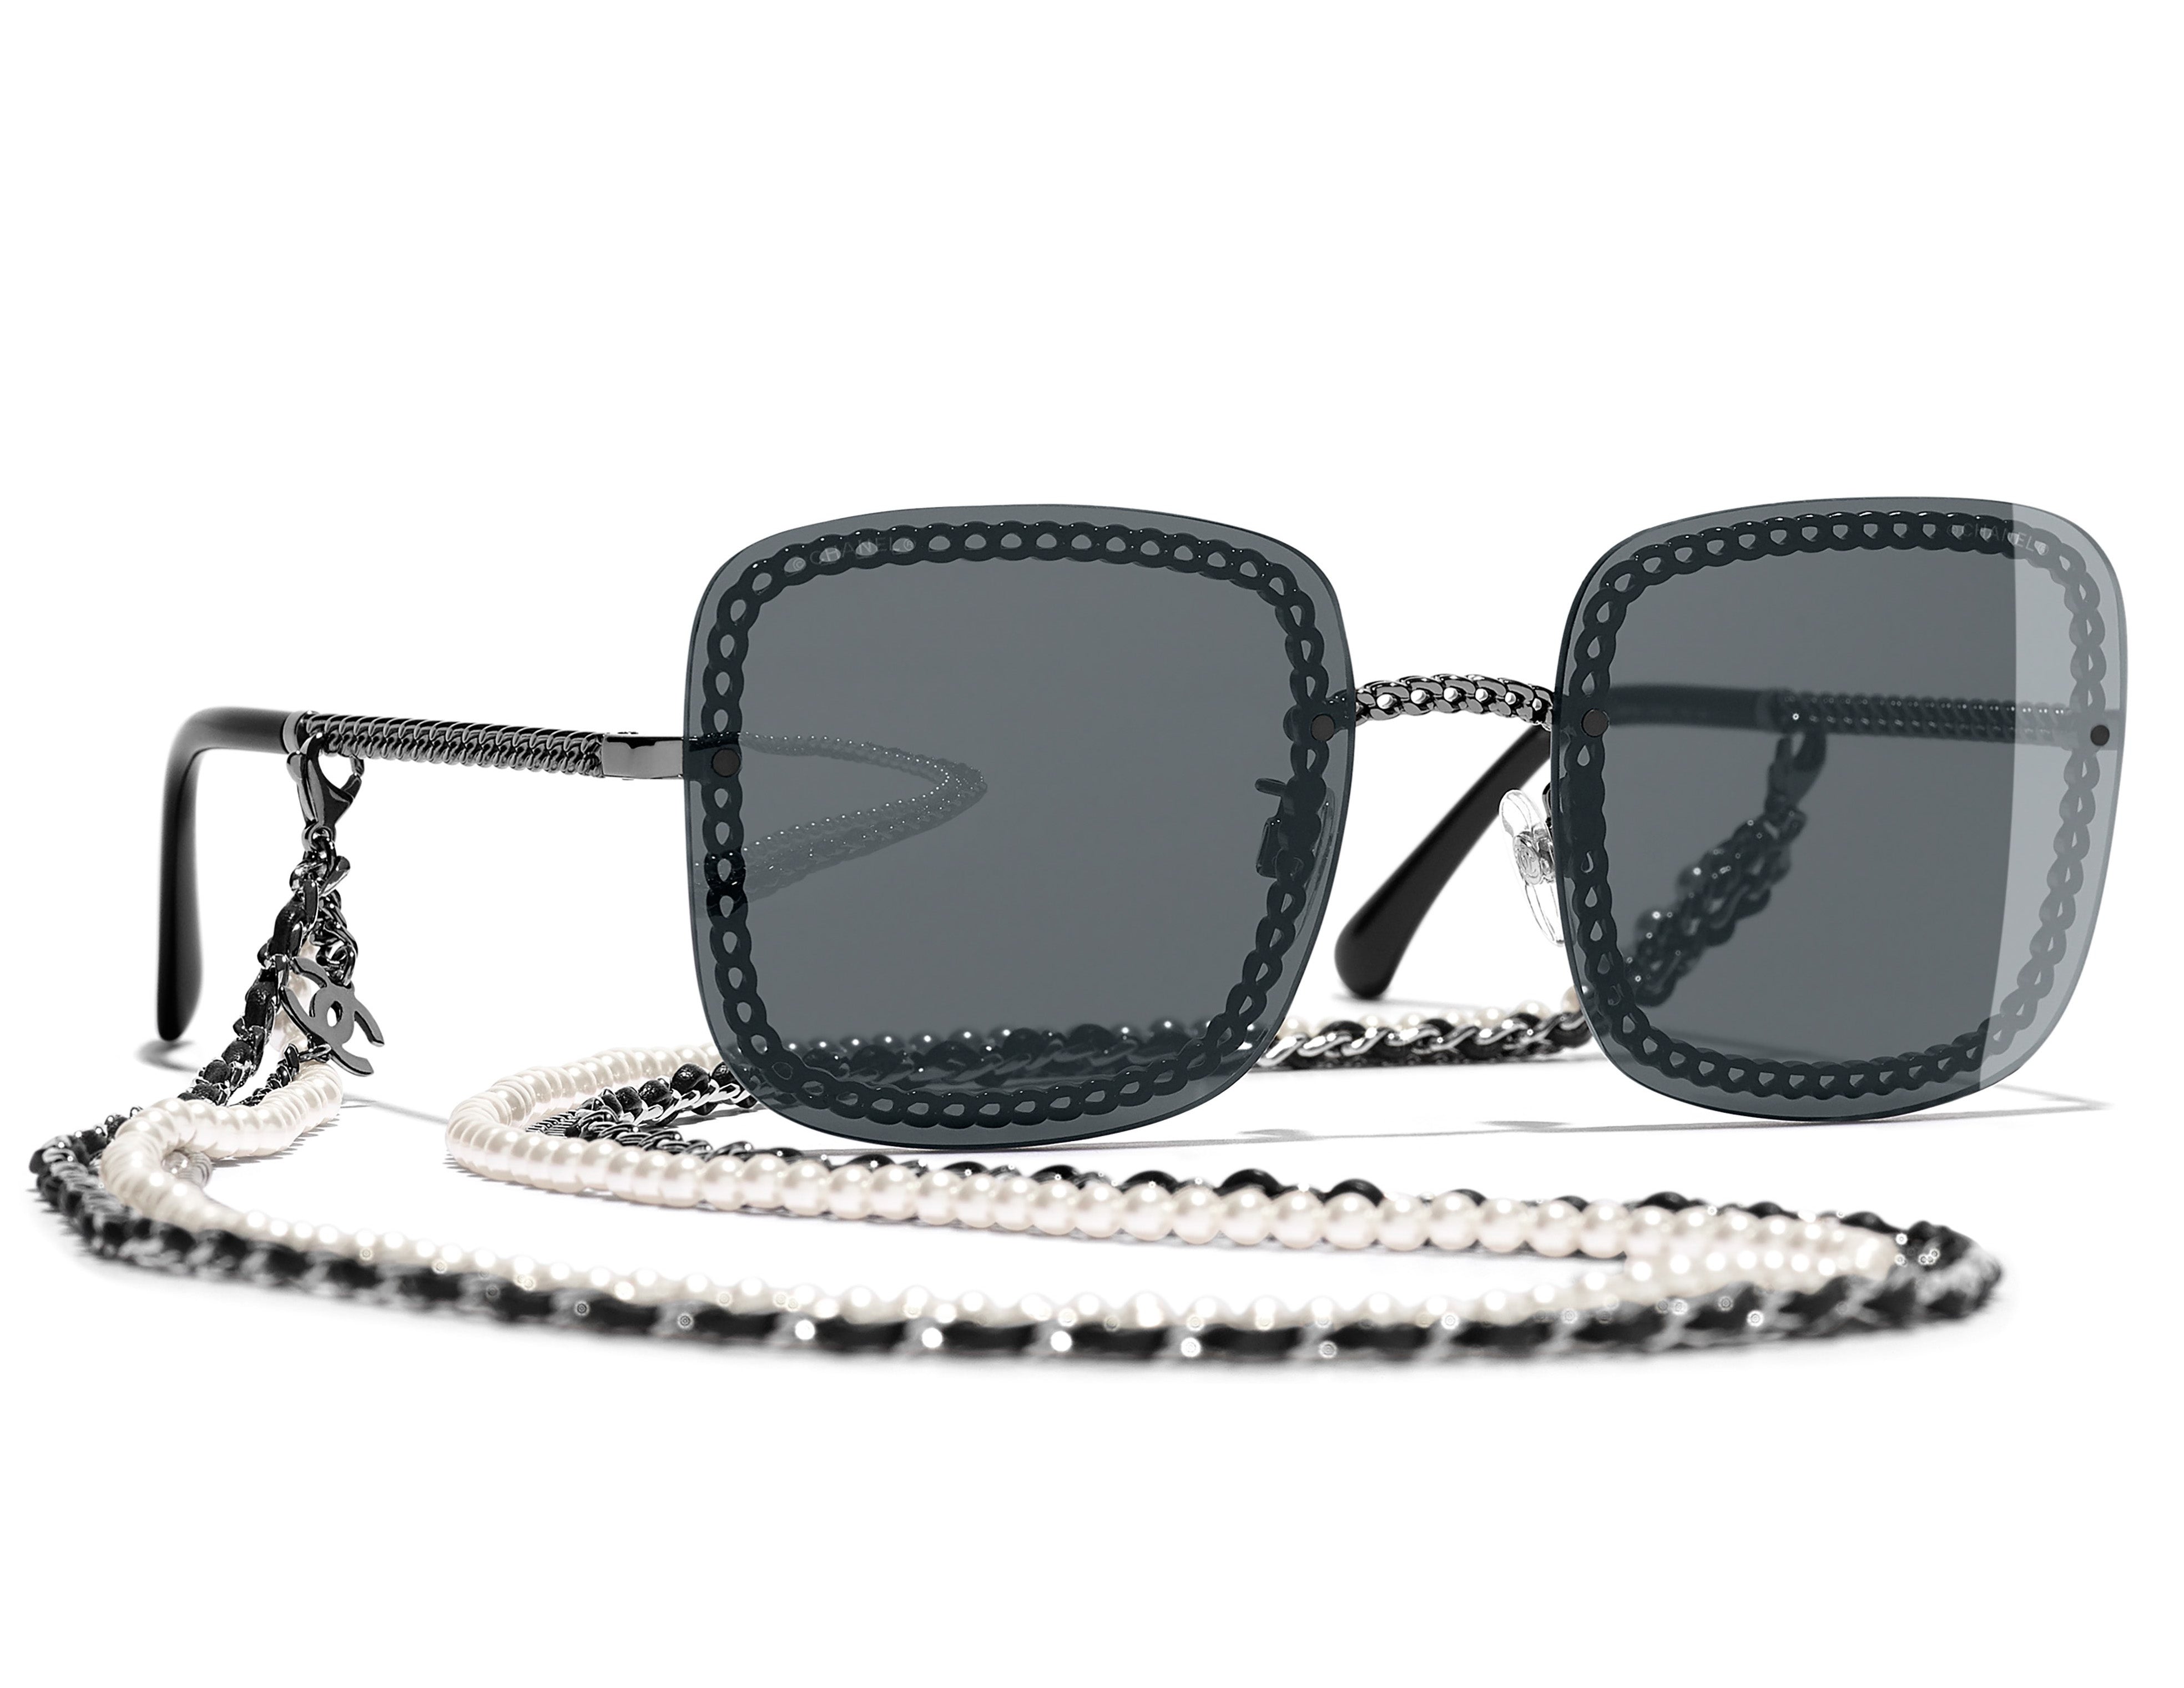 Shop CHANEL Square With Jewels Sunglasses by kiaraninth